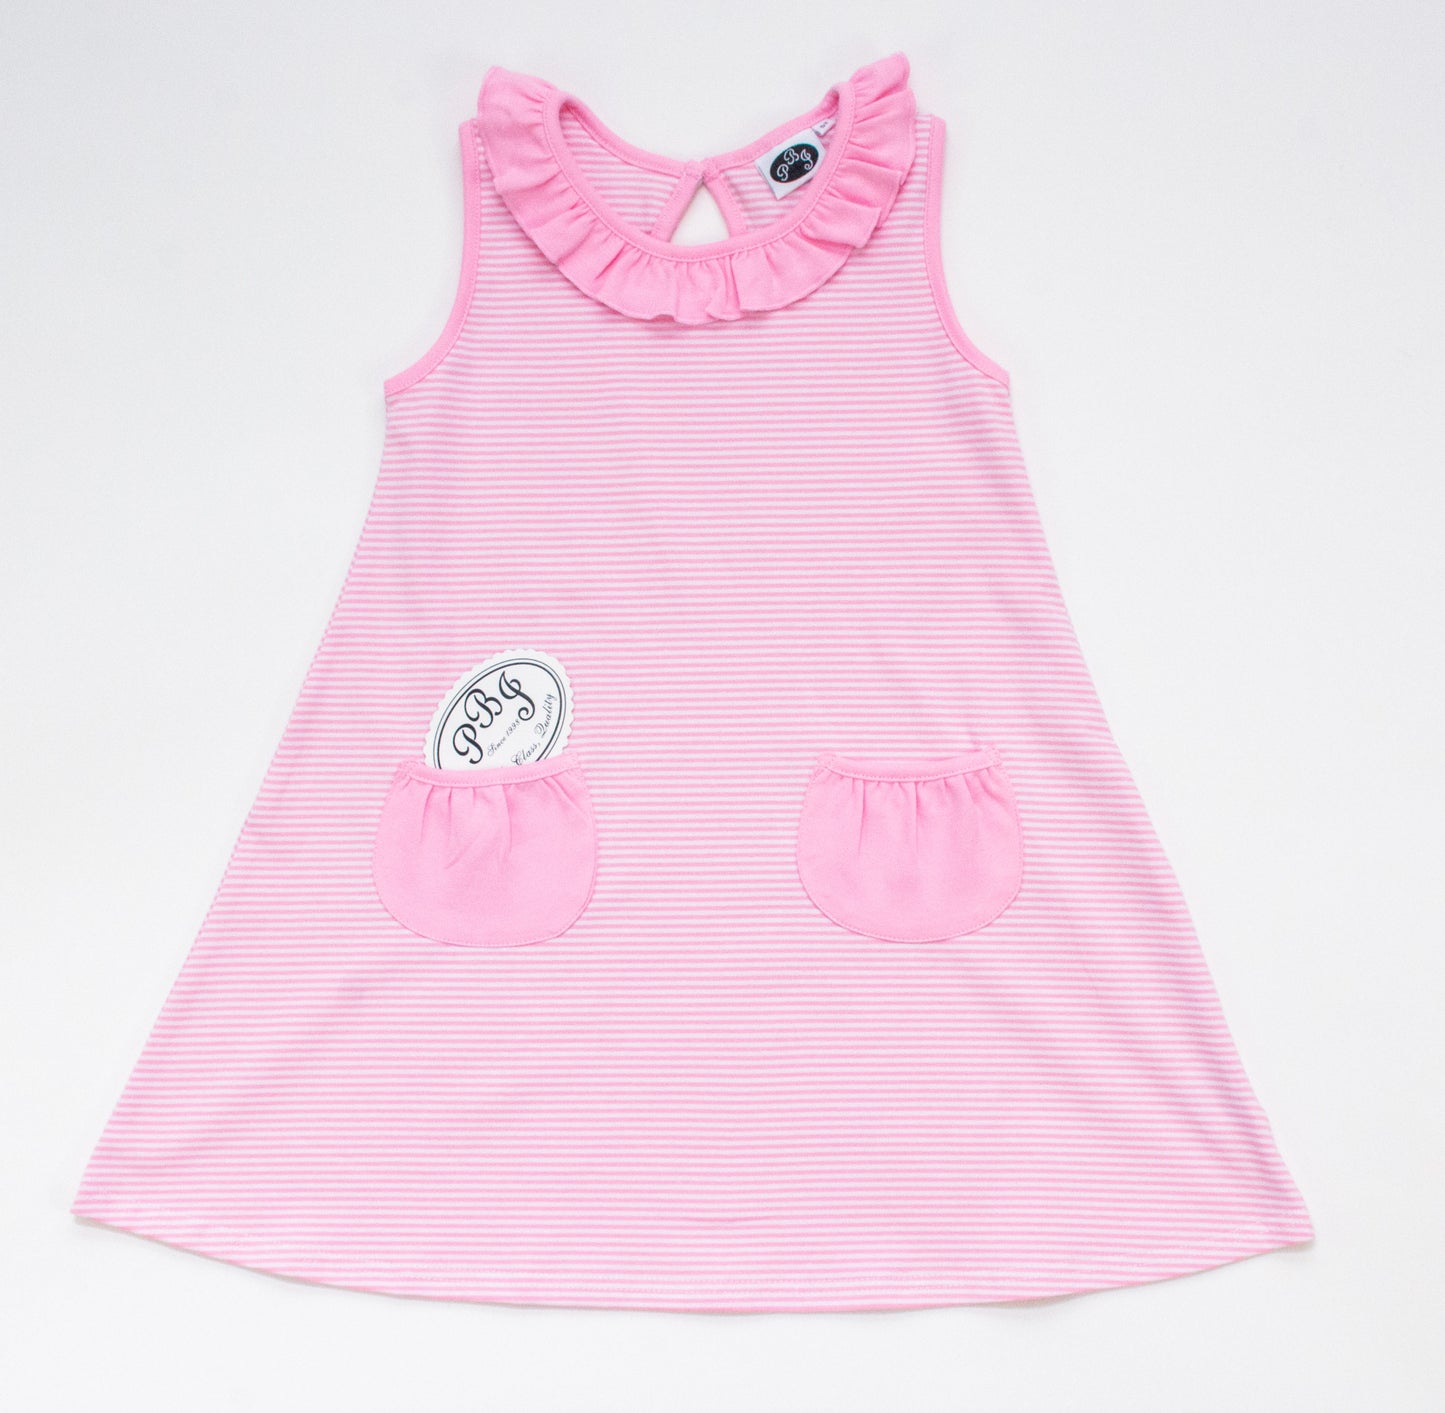 Swing dress sleeveless with pockets - Pink*